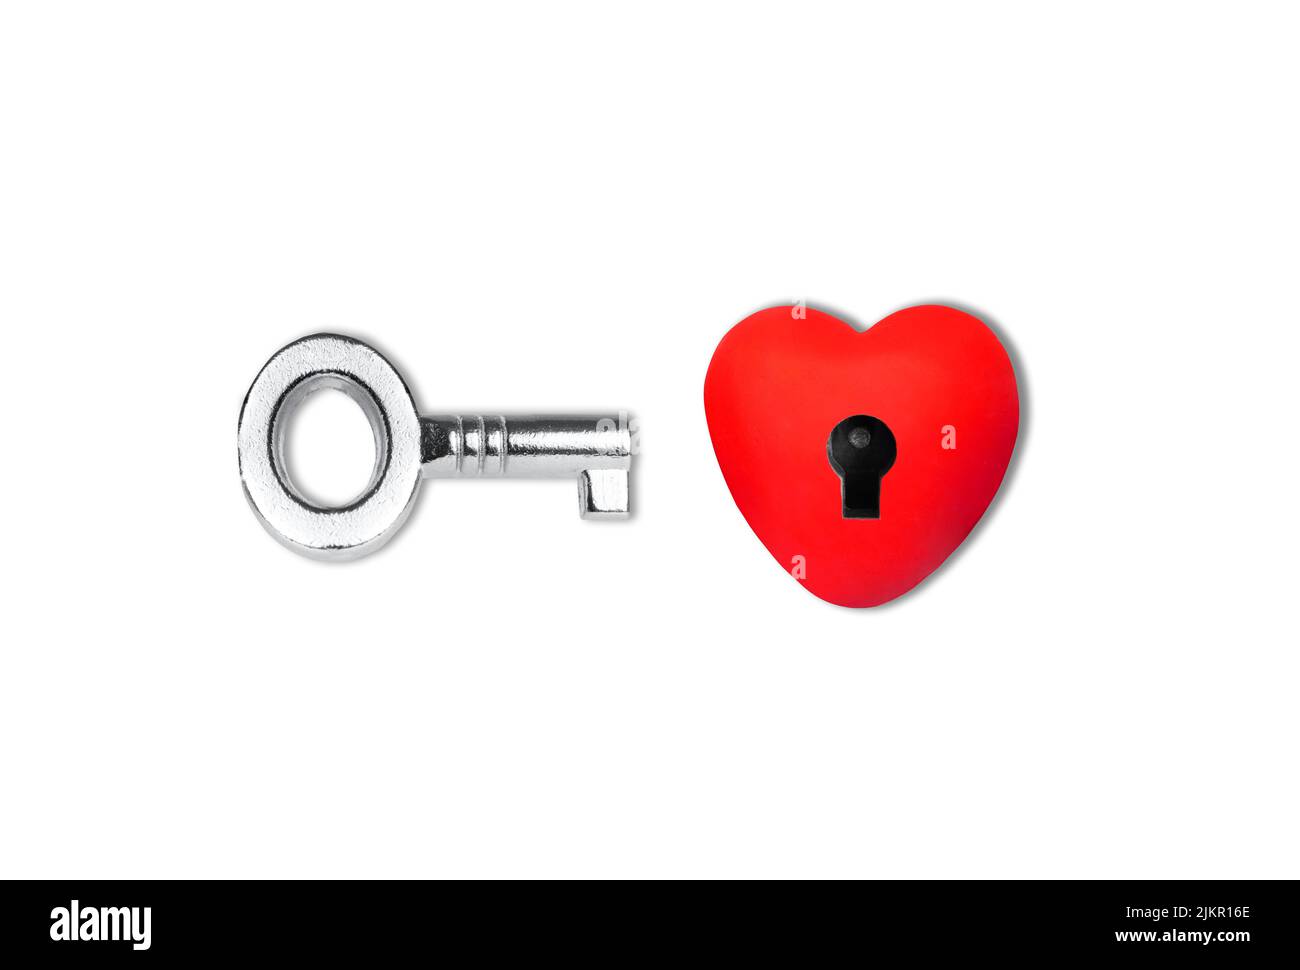 Heart shape with a keyhole and a silver-toned skeleton key isolated on white background. Romantic concept. Stock Photo